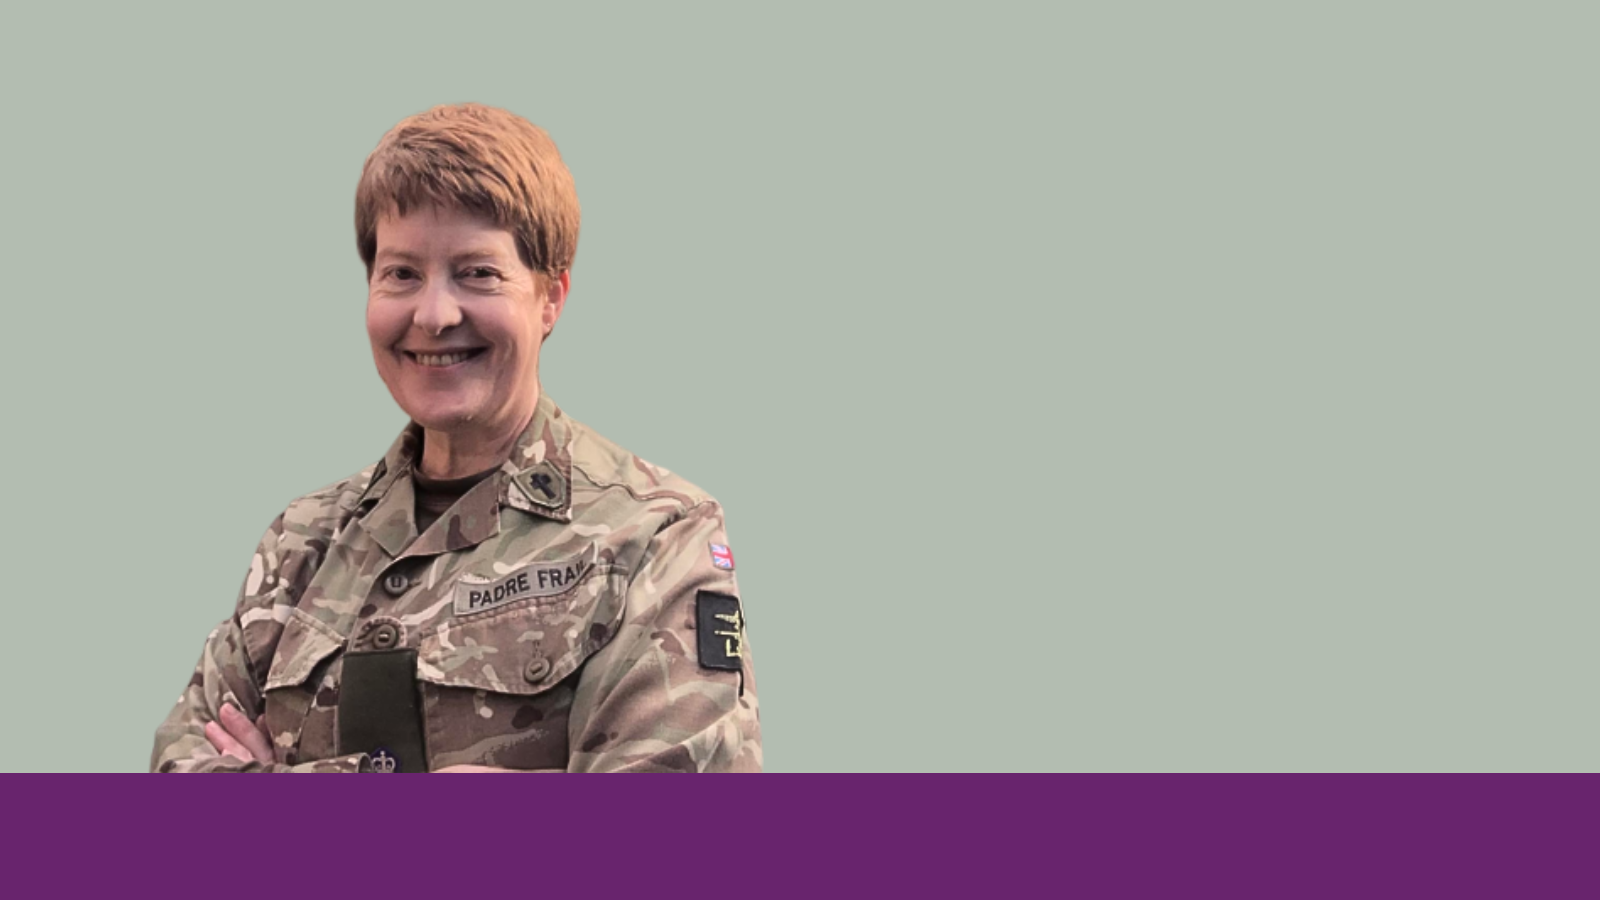 A smiling woman with short red hair wearing British Army combat uniform